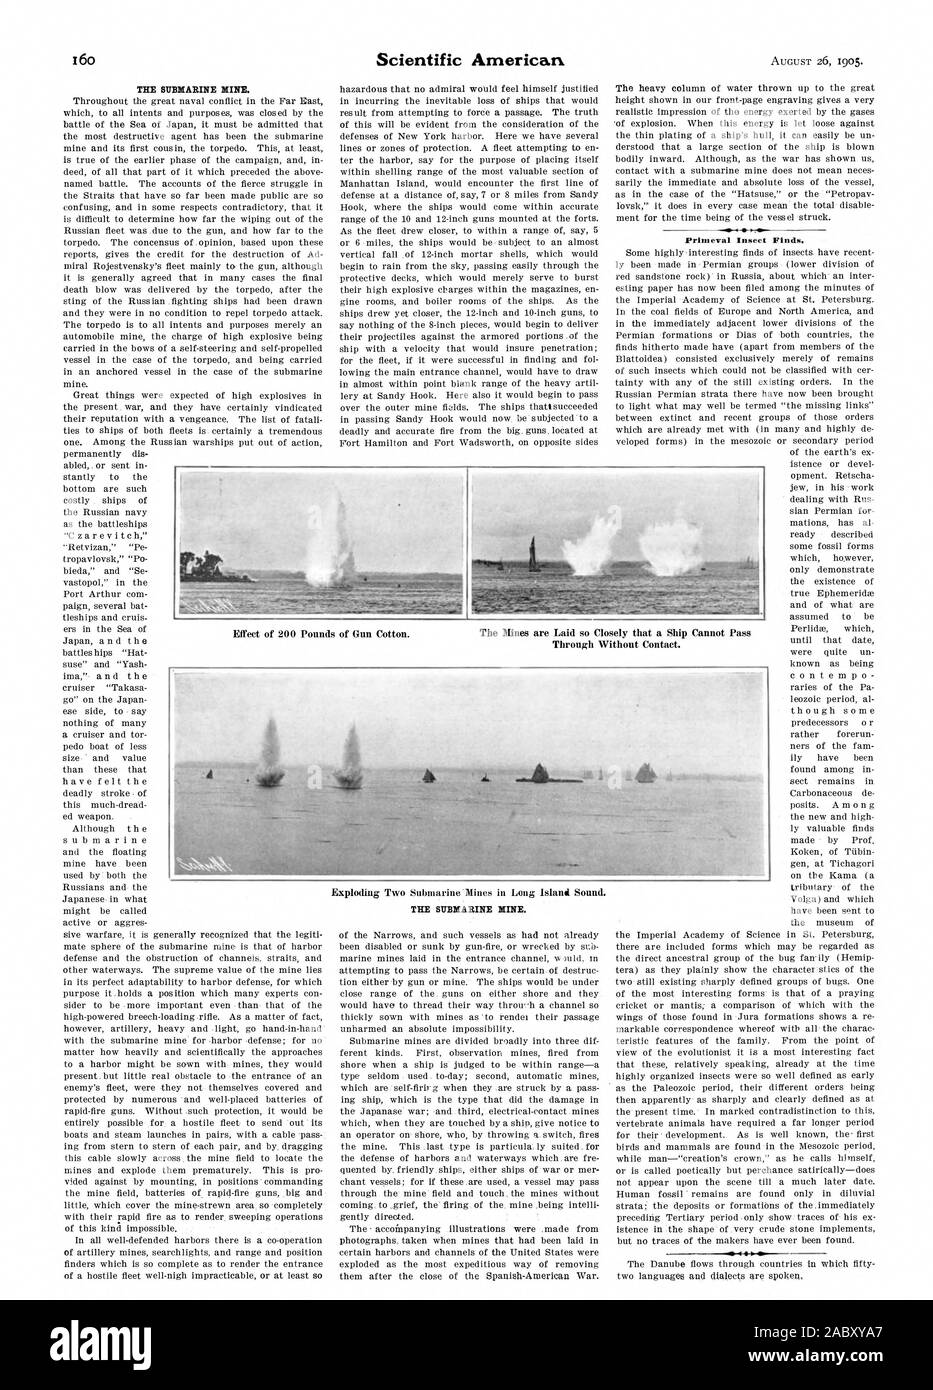 THE SUBMARINE MINE. . .1 Primeval Insect Finds. The Mines are Laid so Closely that a Ship Cannot Pass Through Without Contact., scientific american, 1905-08-26 Stock Photo